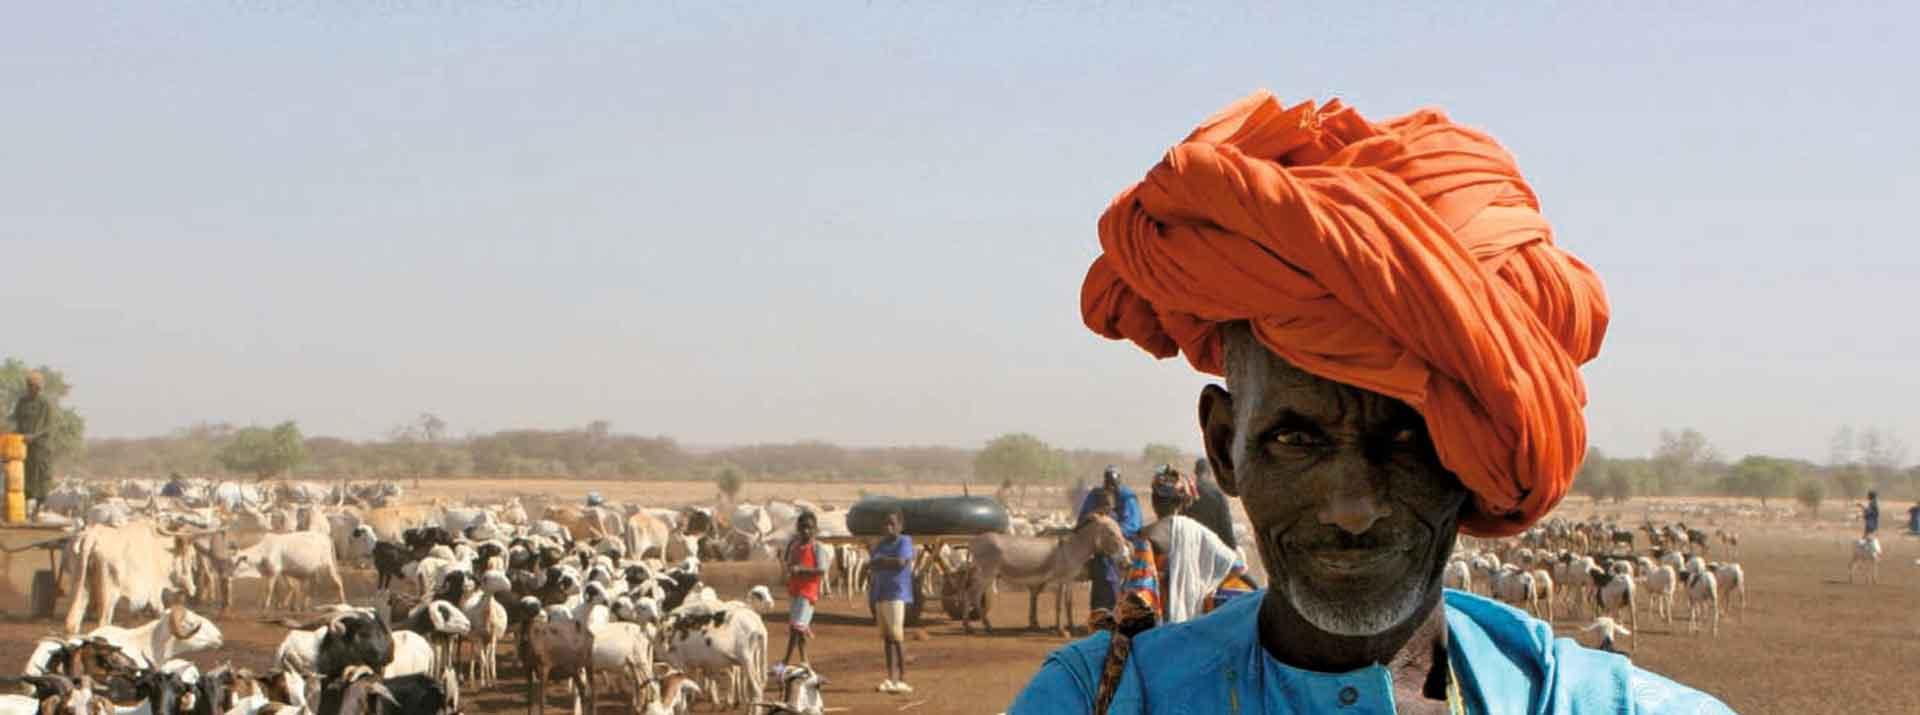 A pastoralist traditionnaly dressed - Courtesy of AUC/EU/AMESD Programme 